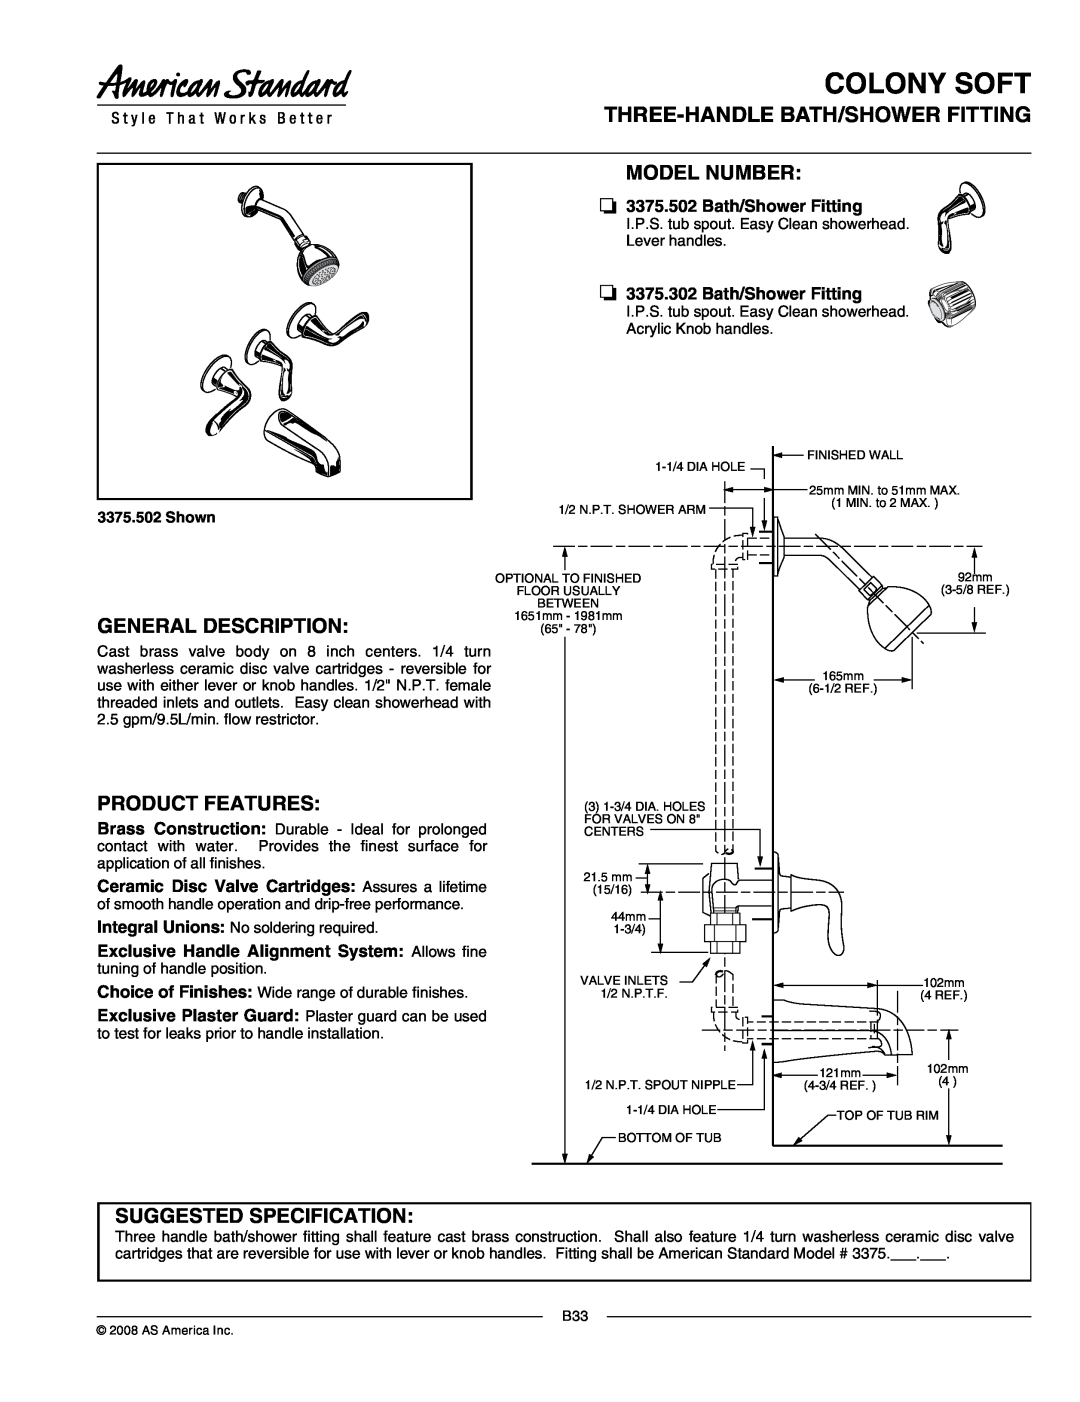 American Standard 3375.302 manual Colony Soft, Three-Handle Bath/Shower Fitting, Shown, Model Number, General Description 